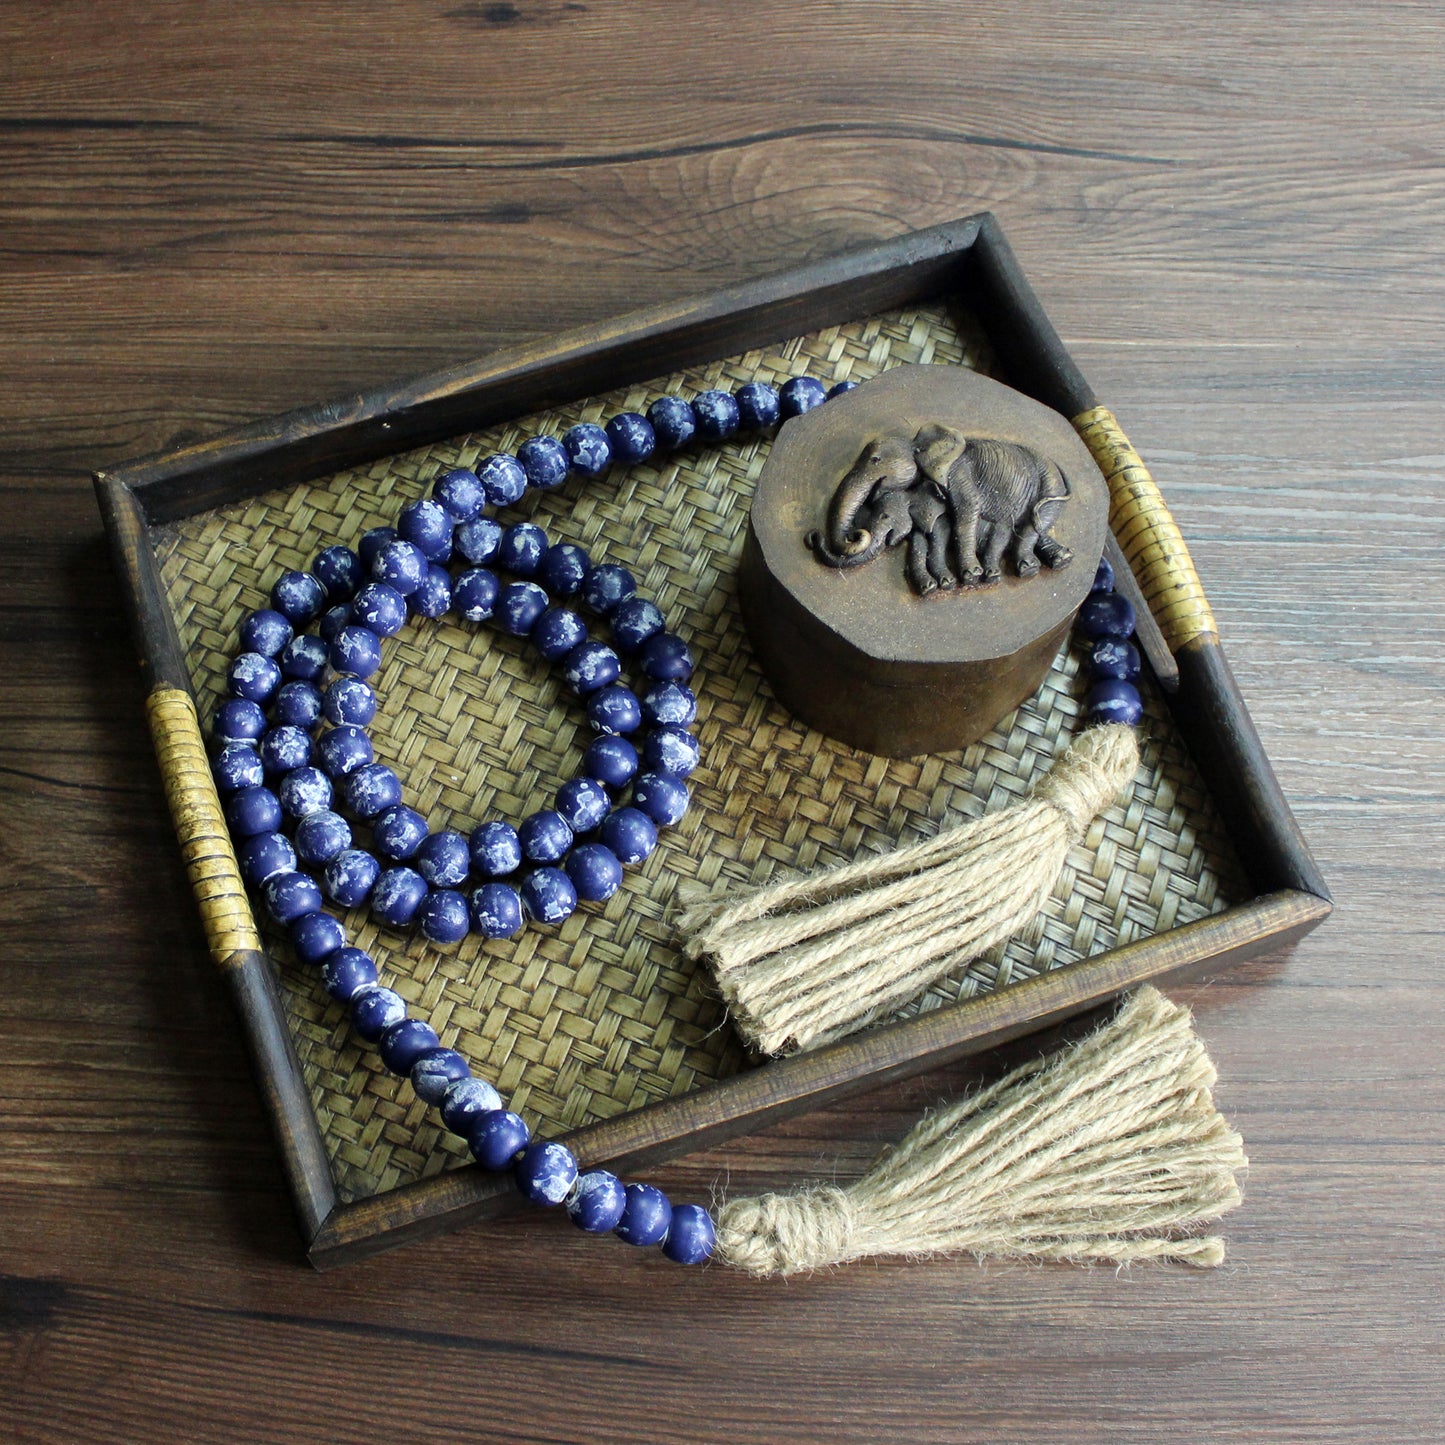 CVHOMEDECO. Wood Beads Garland with Tassels Farmhouse Rustic Wooden Prayer Bead String Wall Hanging Accent for Home Festival Decor. Navy Blue Distressed